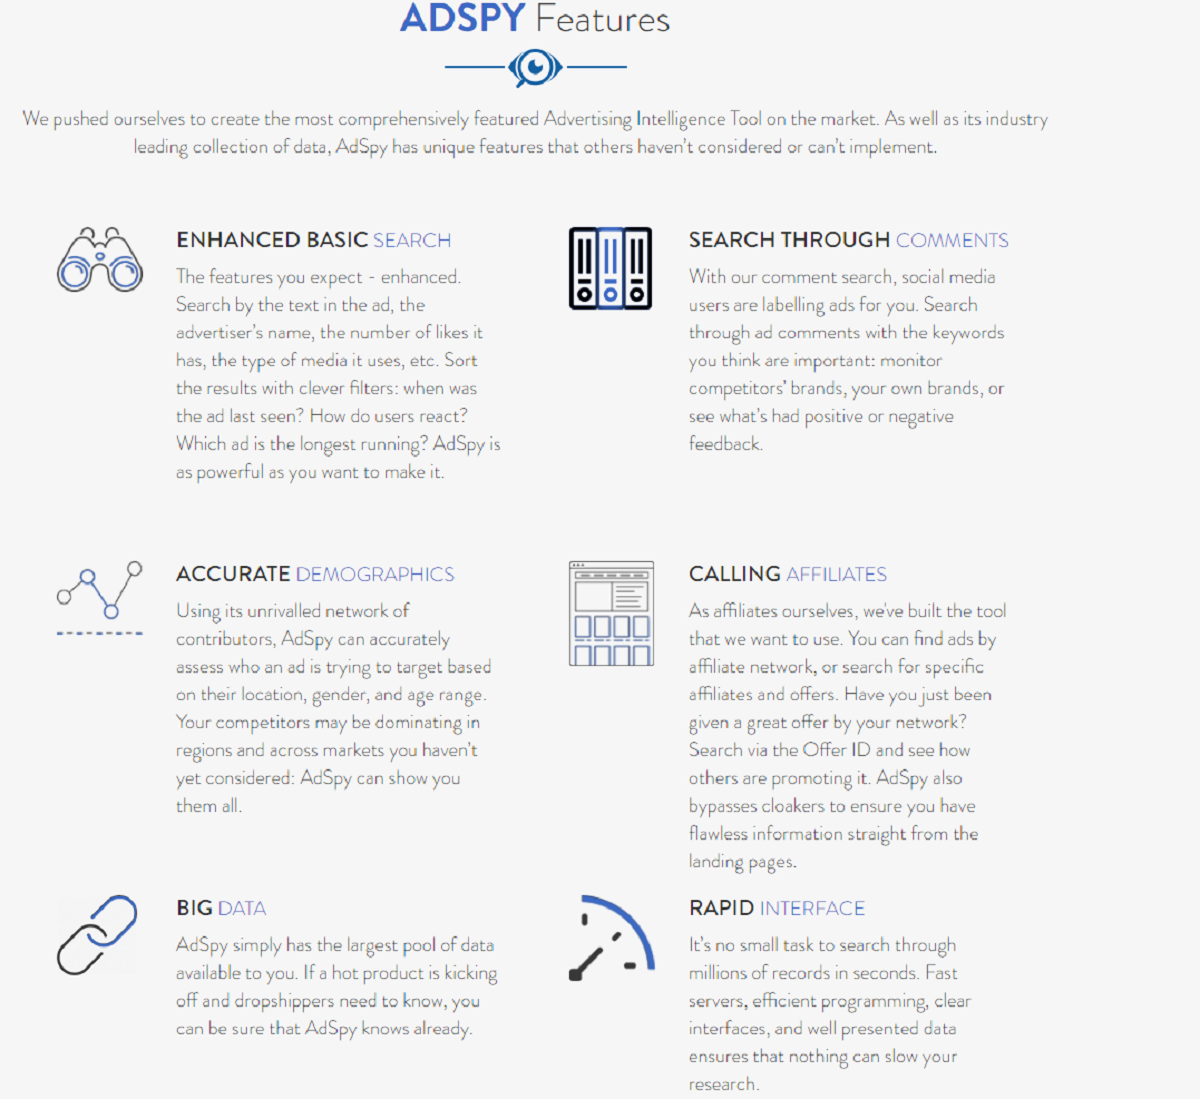 What Are the Features of Adspy?